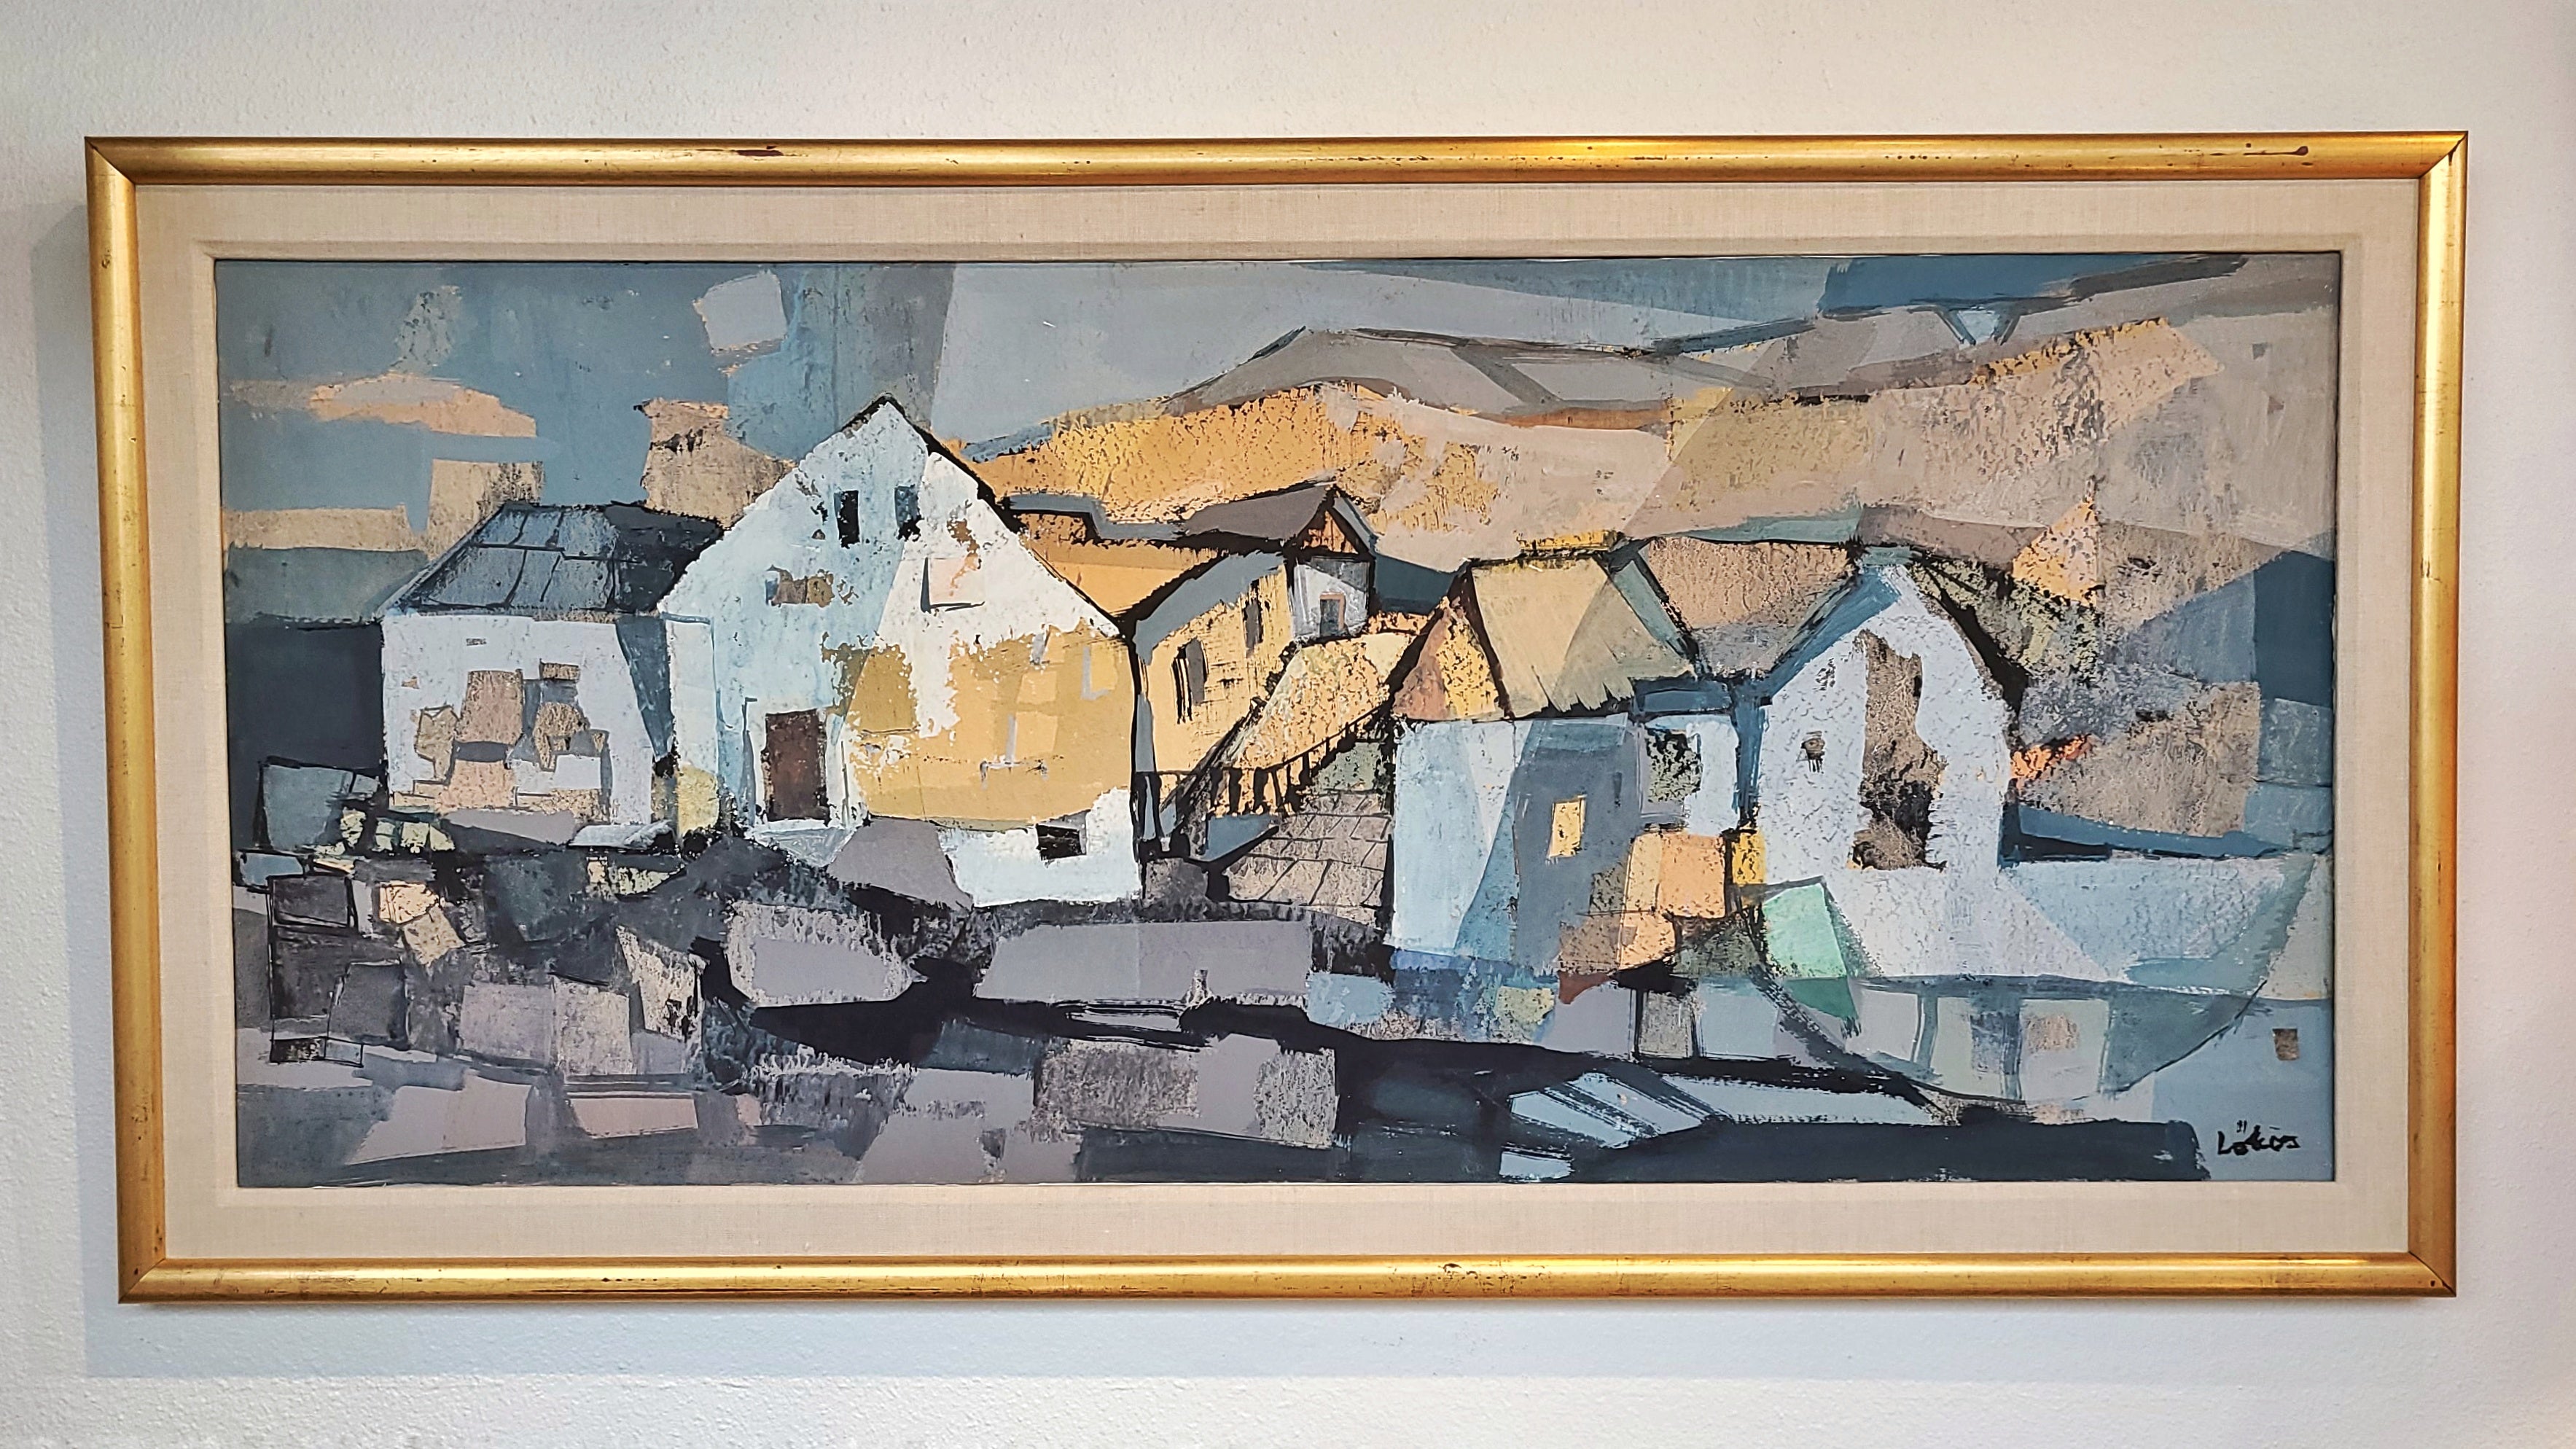 'HOUSES  IN THE HILLS' BY STEFAN LÖKÖS (1913-1994) MIXED MEDIA LANDSCAPE ON PAPER